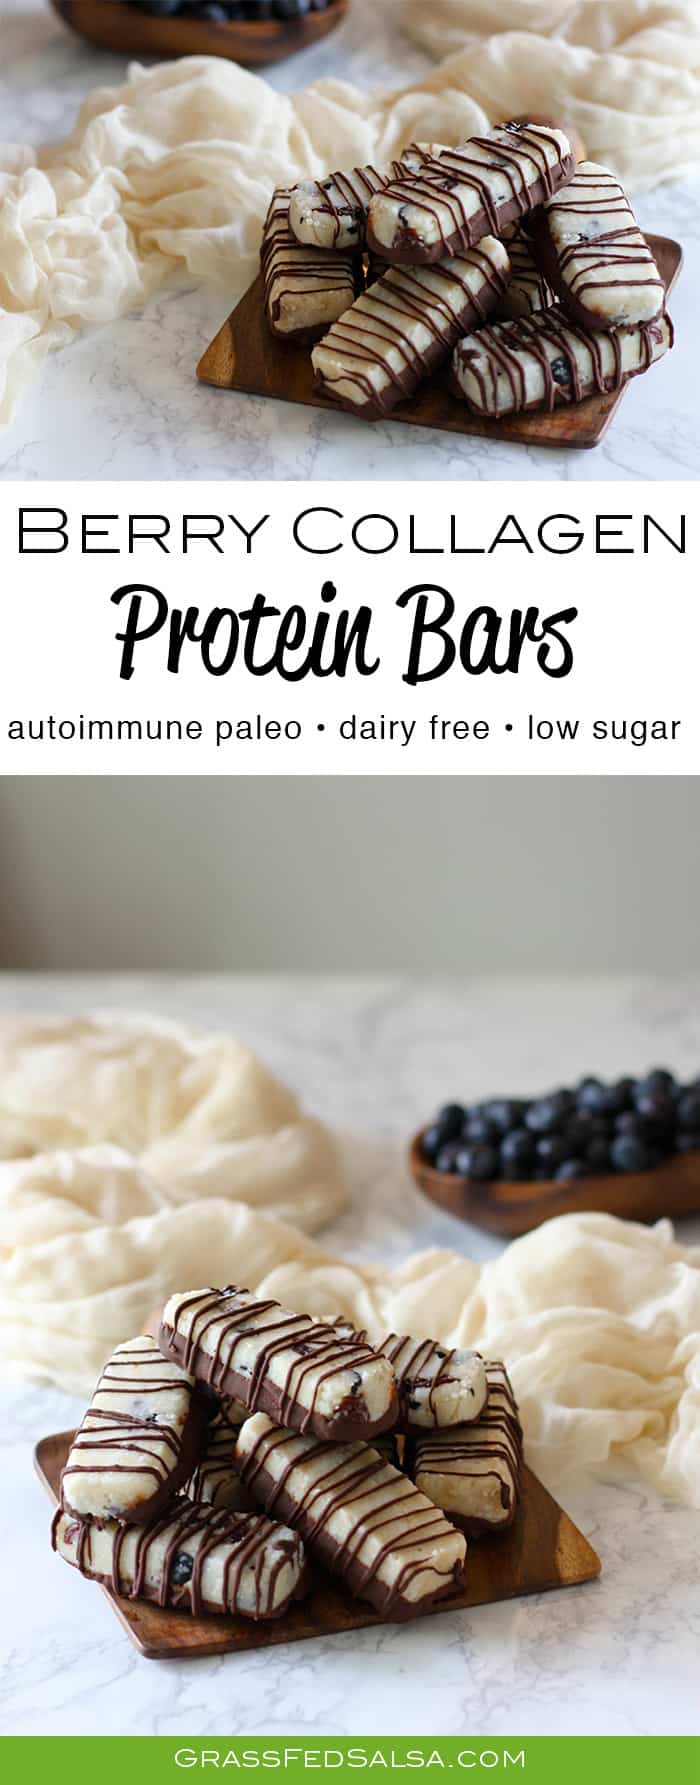 Berry Collagen Protein Breakfast Bars. The recipe is gluten free, egg free, nut free, refined sugar free, dairy free, grain free, and AIP. Get the full recipe here.